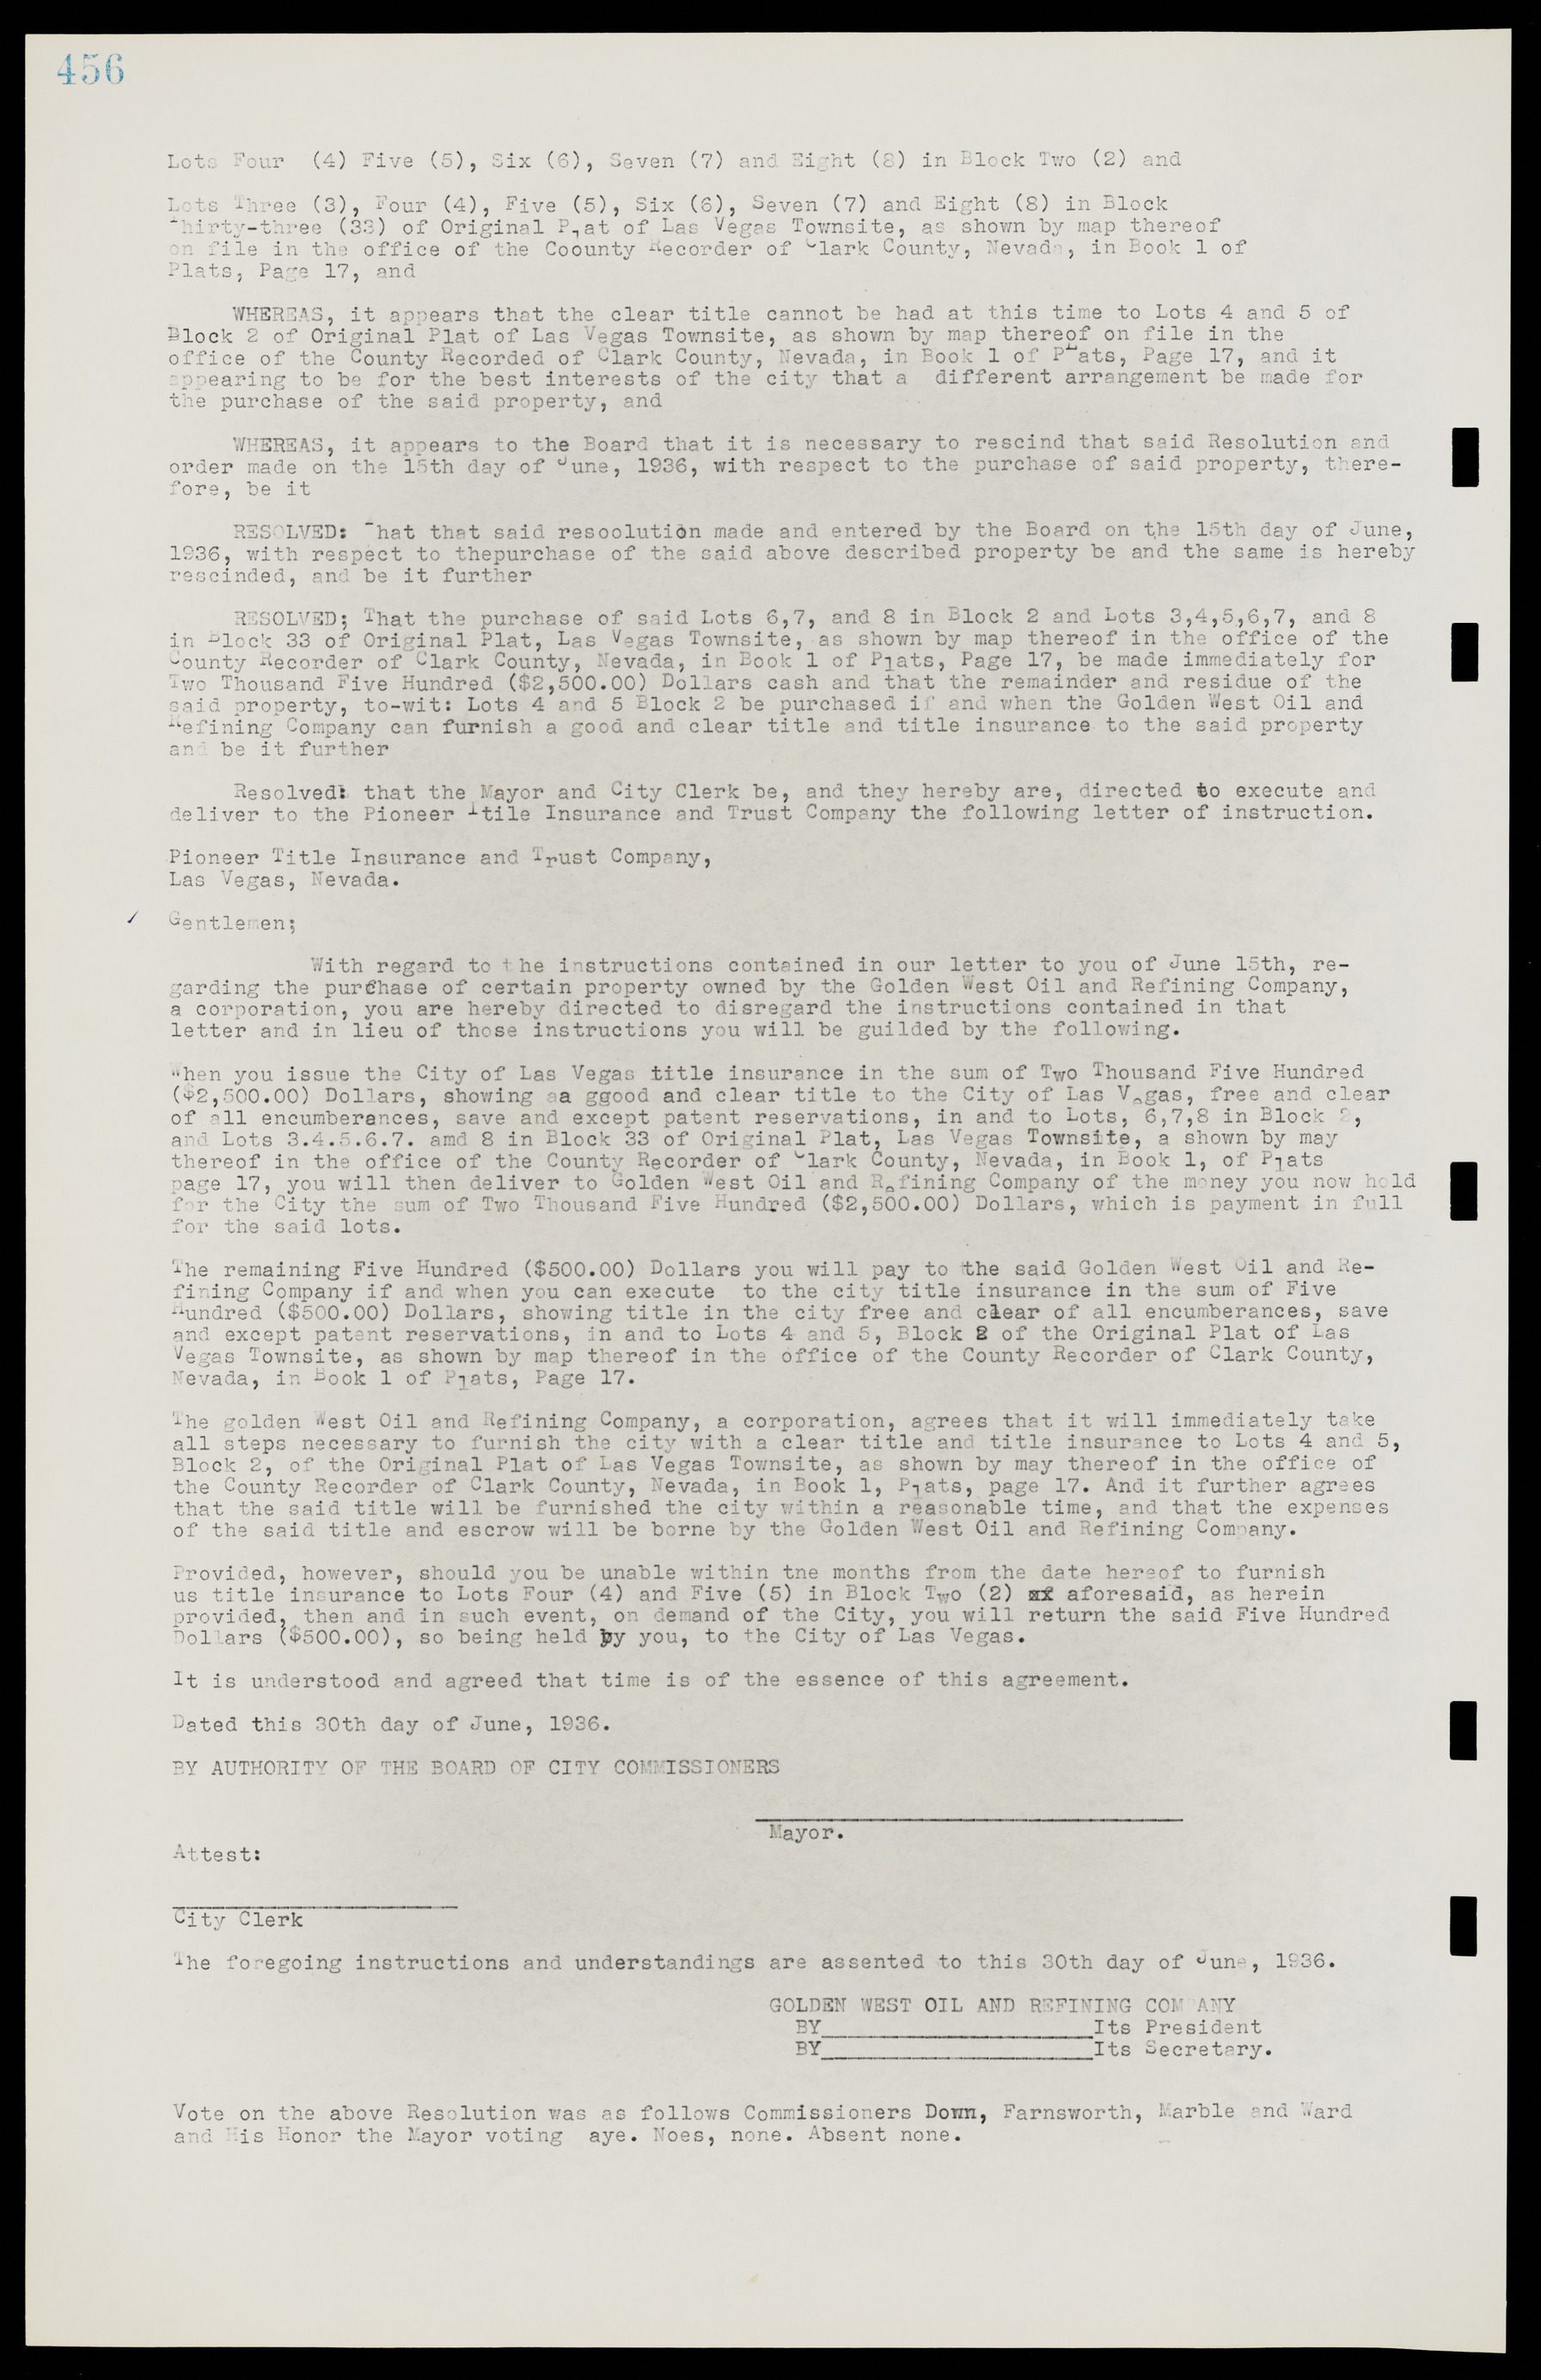 Las Vegas City Commission Minutes, May 14, 1929 to February 11, 1937, lvc000003-463